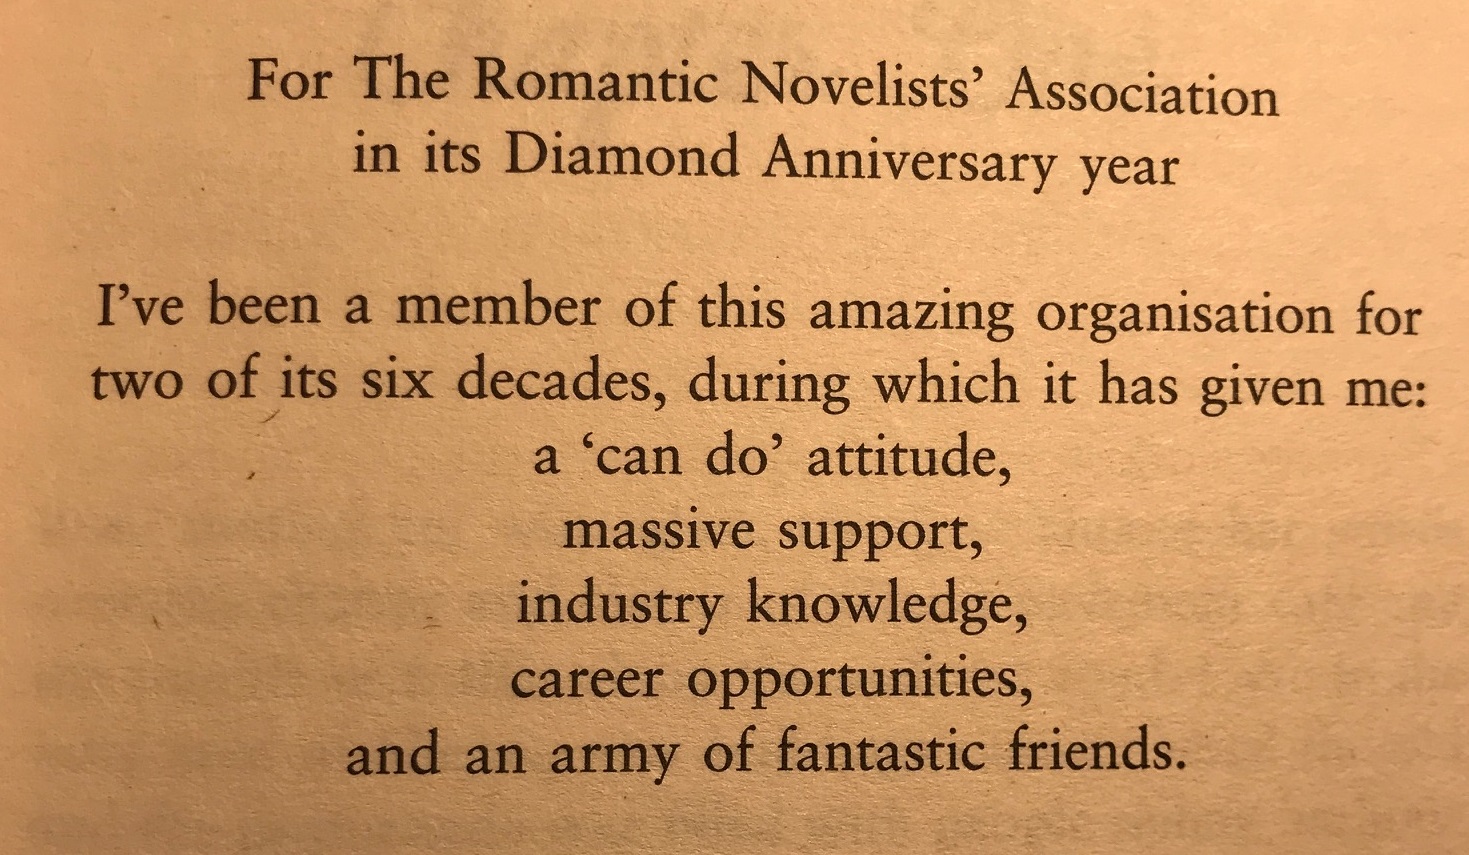 For the Romantic Novelists' Association in its Diamond Anniversary year. I've been a member of this amazing organisation for two of its six decades, during which it has given me: a 'can do' attitude, massive support, industry knowledge, career opportunities, and an army of fantastic friends.